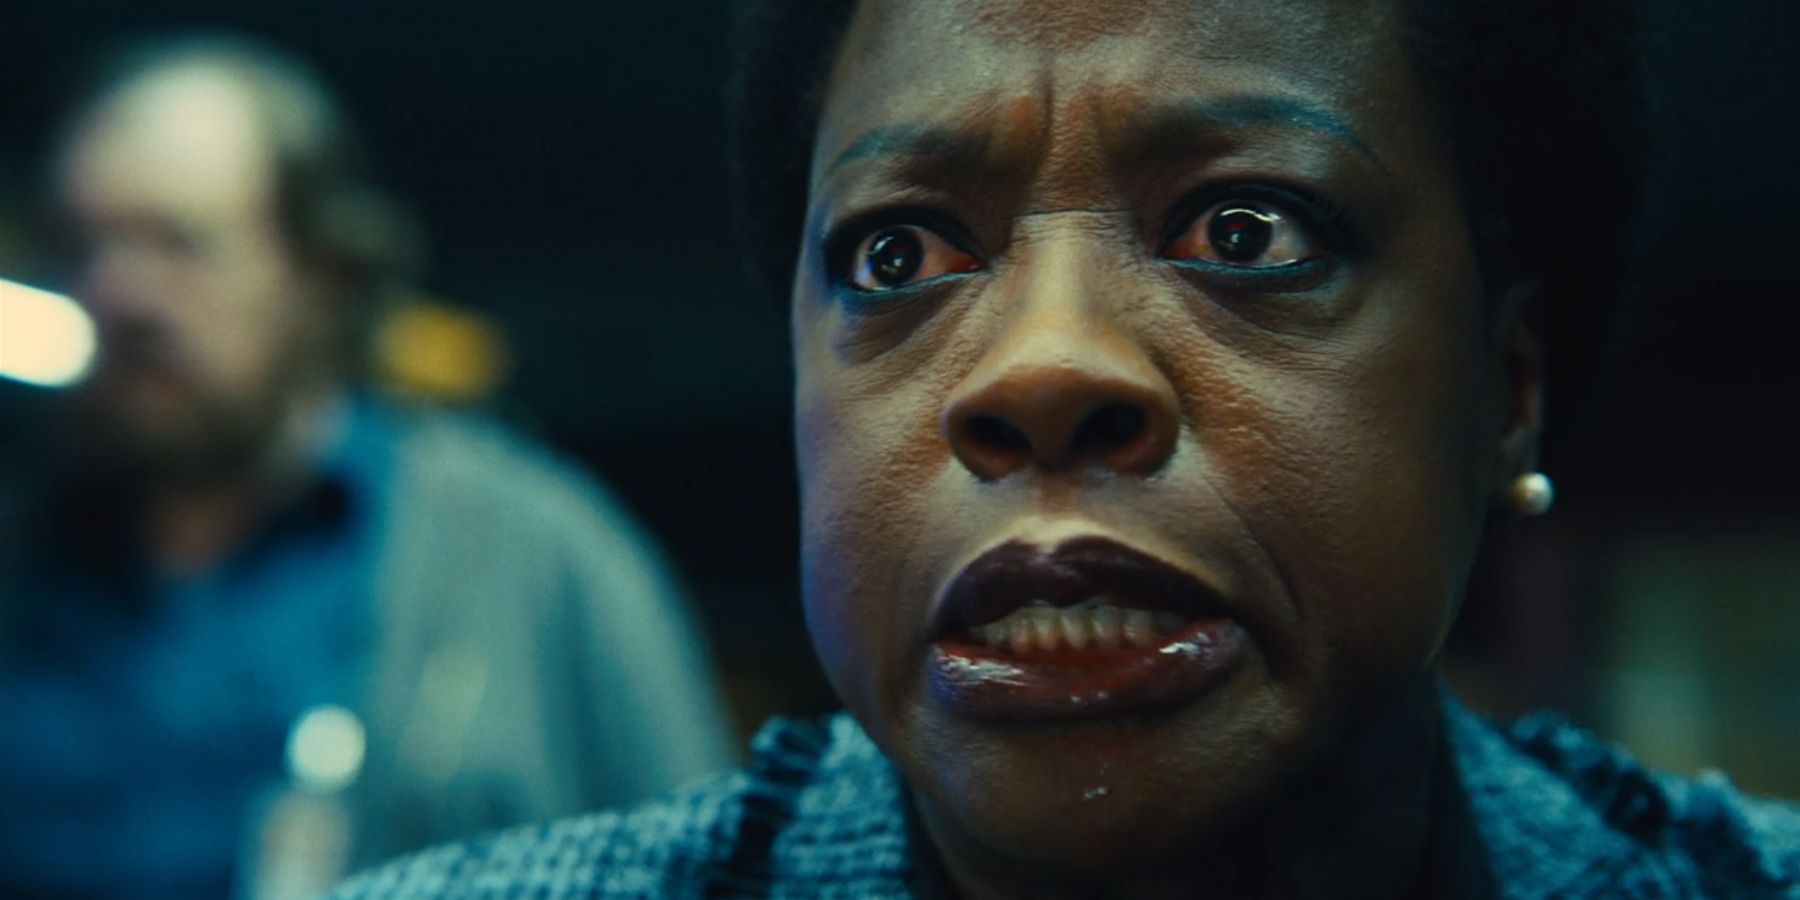 Amanda Waller threatening Task Force X in James Gunn's The Suicide Squad